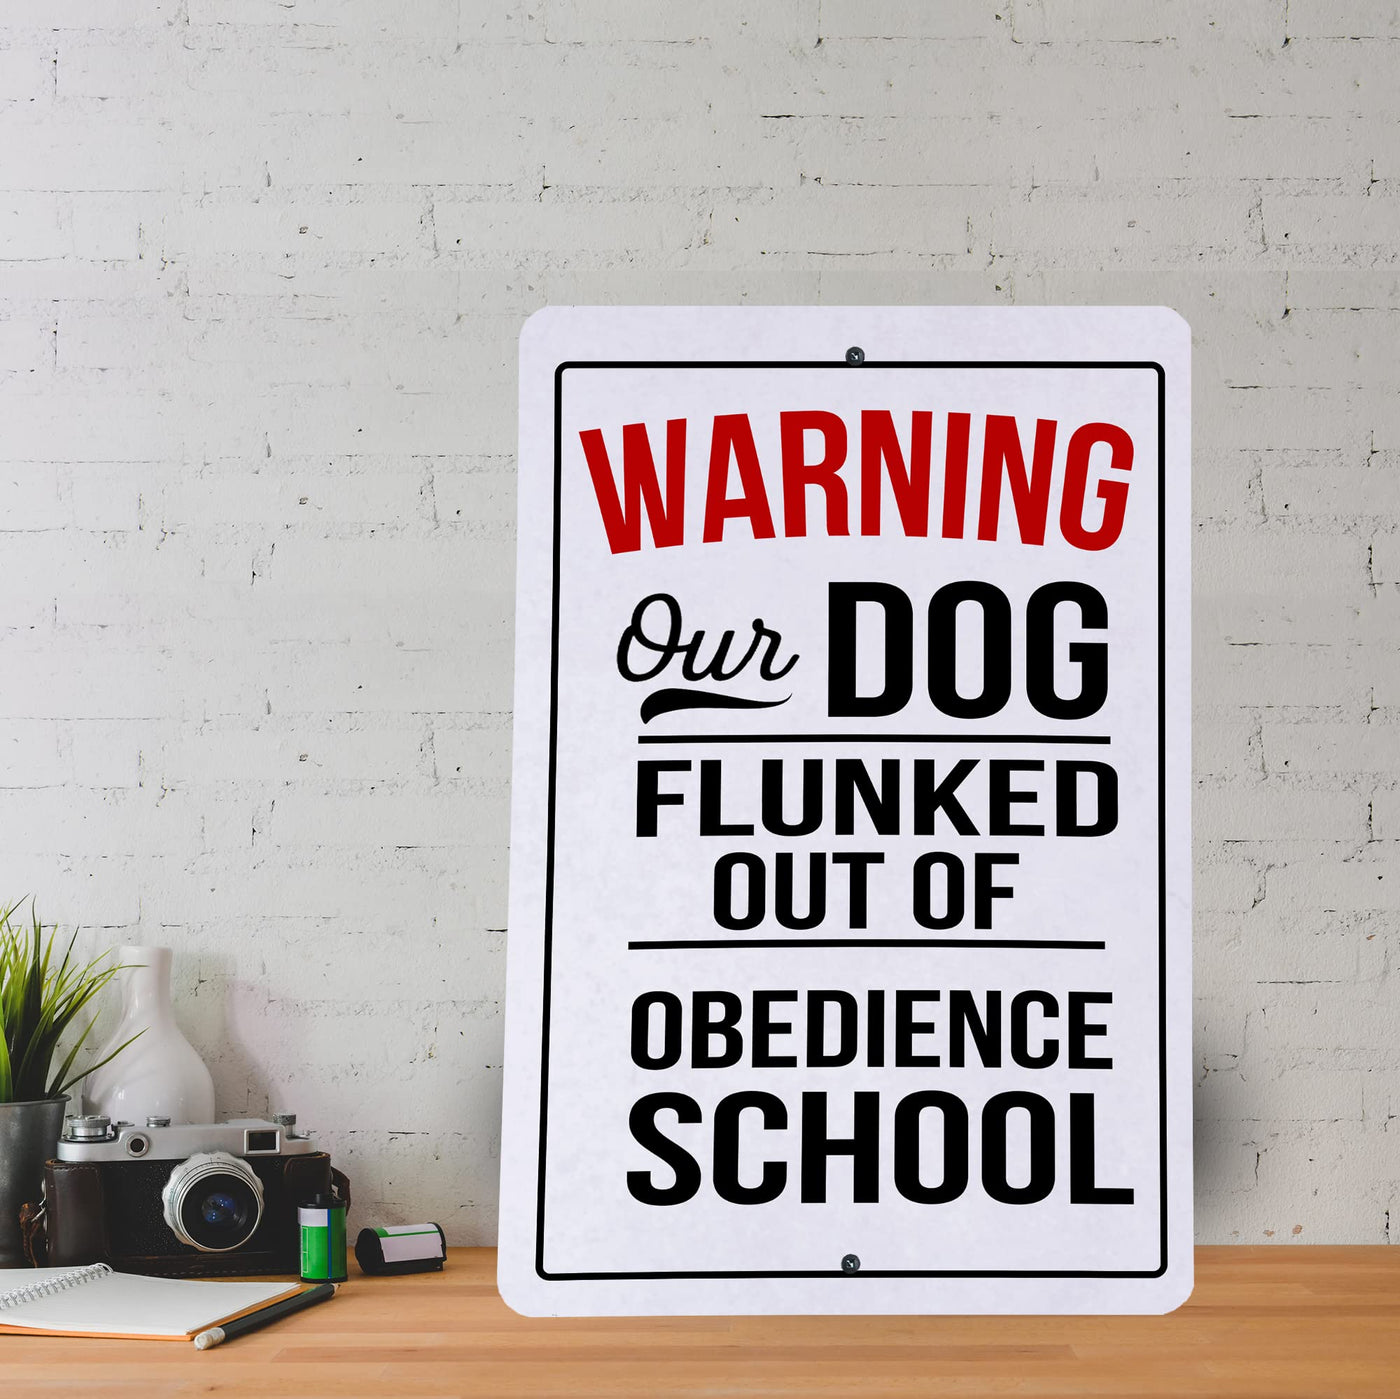 Warning-Our Dog Flunked Obedience School Metal Signs Vintage Wall Art -8 x 12" Funny Rustic Pets Sign for Bar, Garage, Man Cave, Shop - Retro Tin Sign Decor for Home-Office. Fun Sign for Guests!